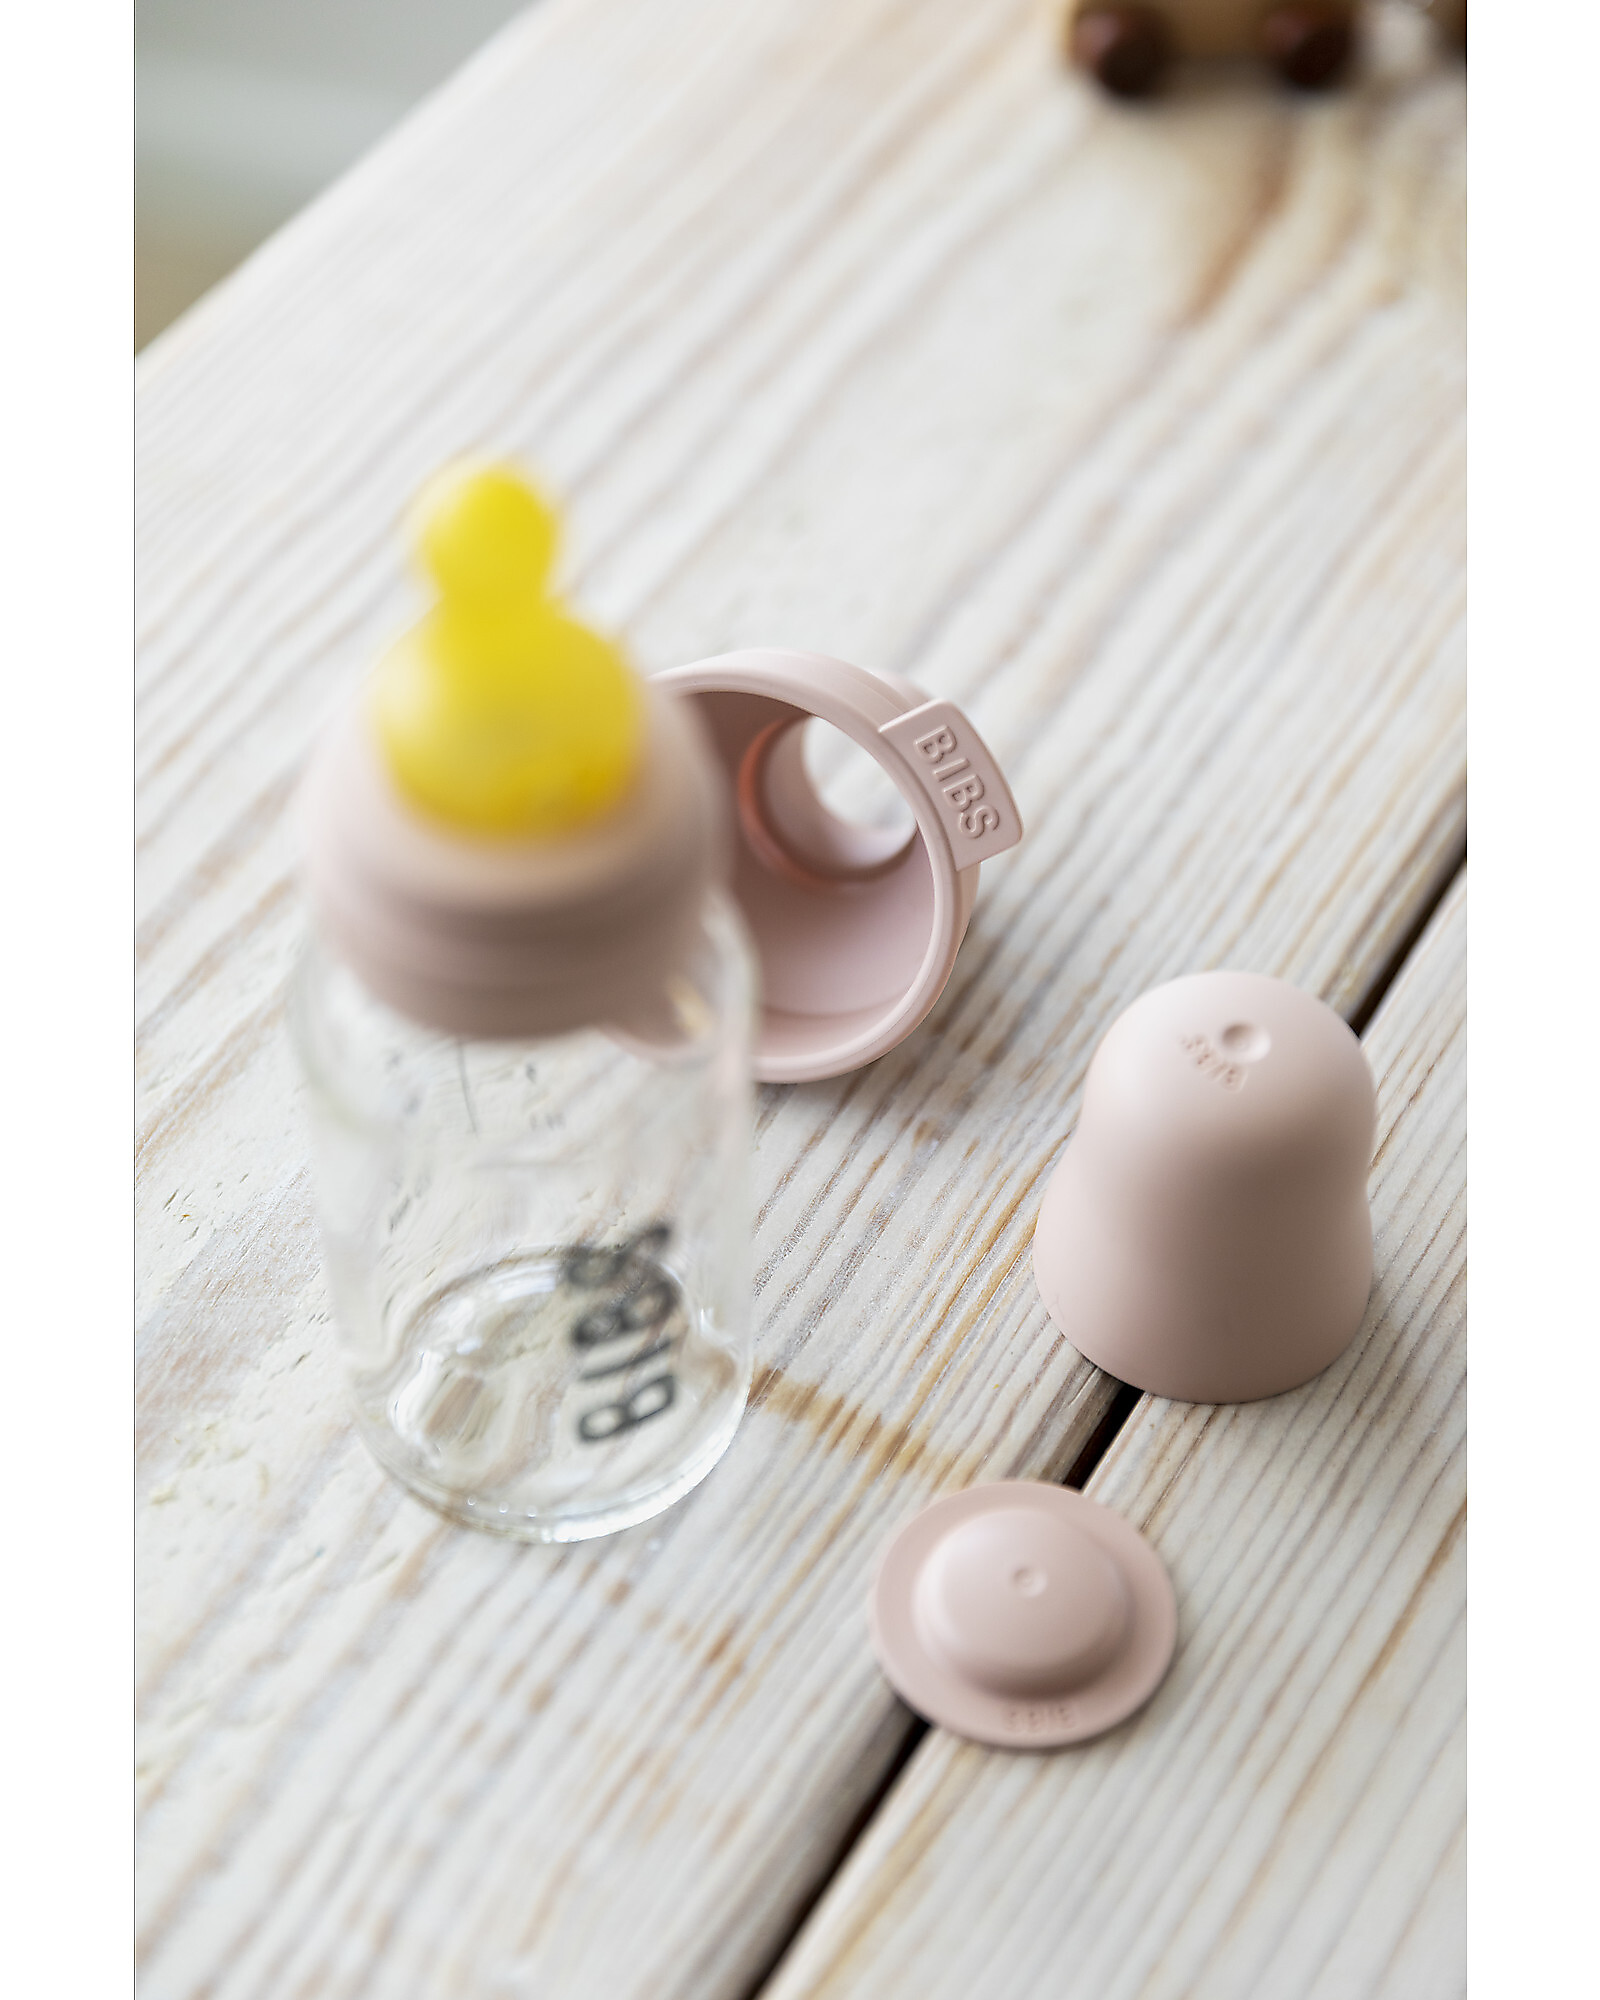 https://data.family-nation.com/imgprodotto/bibs-outlet-baby-bottle-complete-set-blush-110ml-recyclable-and-dishwasher-safe-new-design-showroom-sample-baby-bottles_480881_zoom.jpg